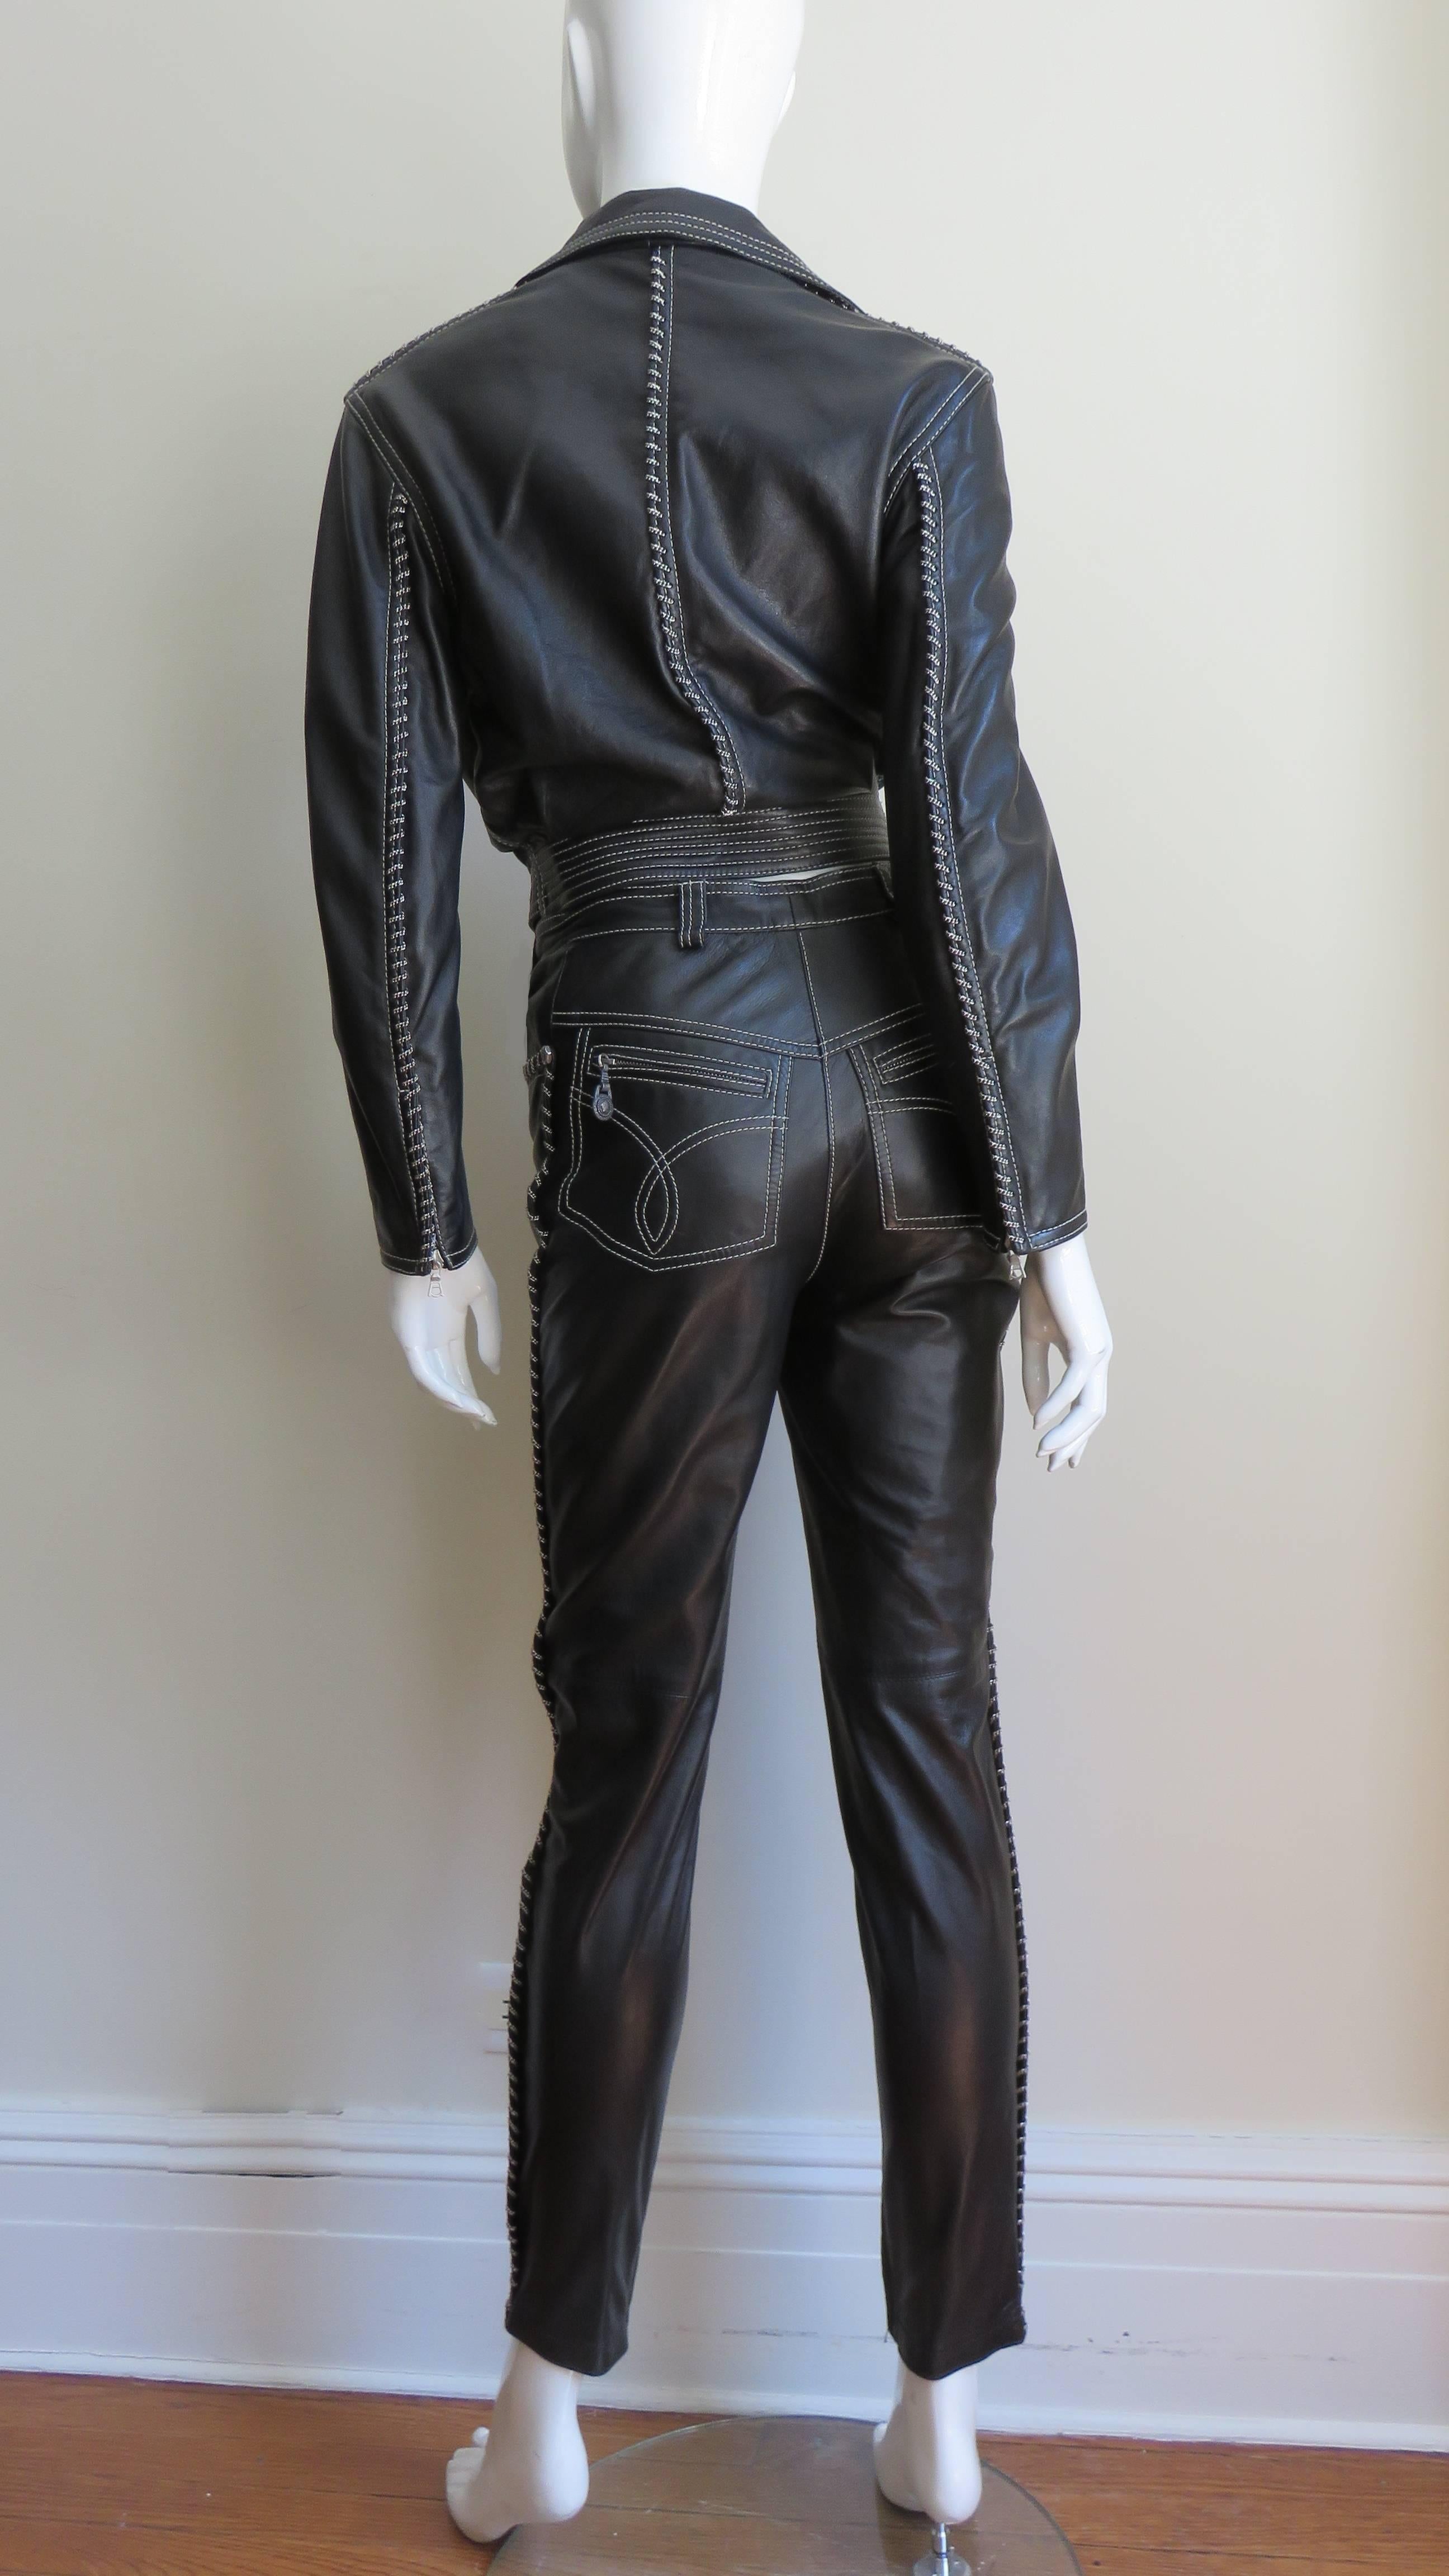  Gianni Versace A/W 1992 Leather Motorcycle Jacket and Pants With Chain Trim  For Sale 6